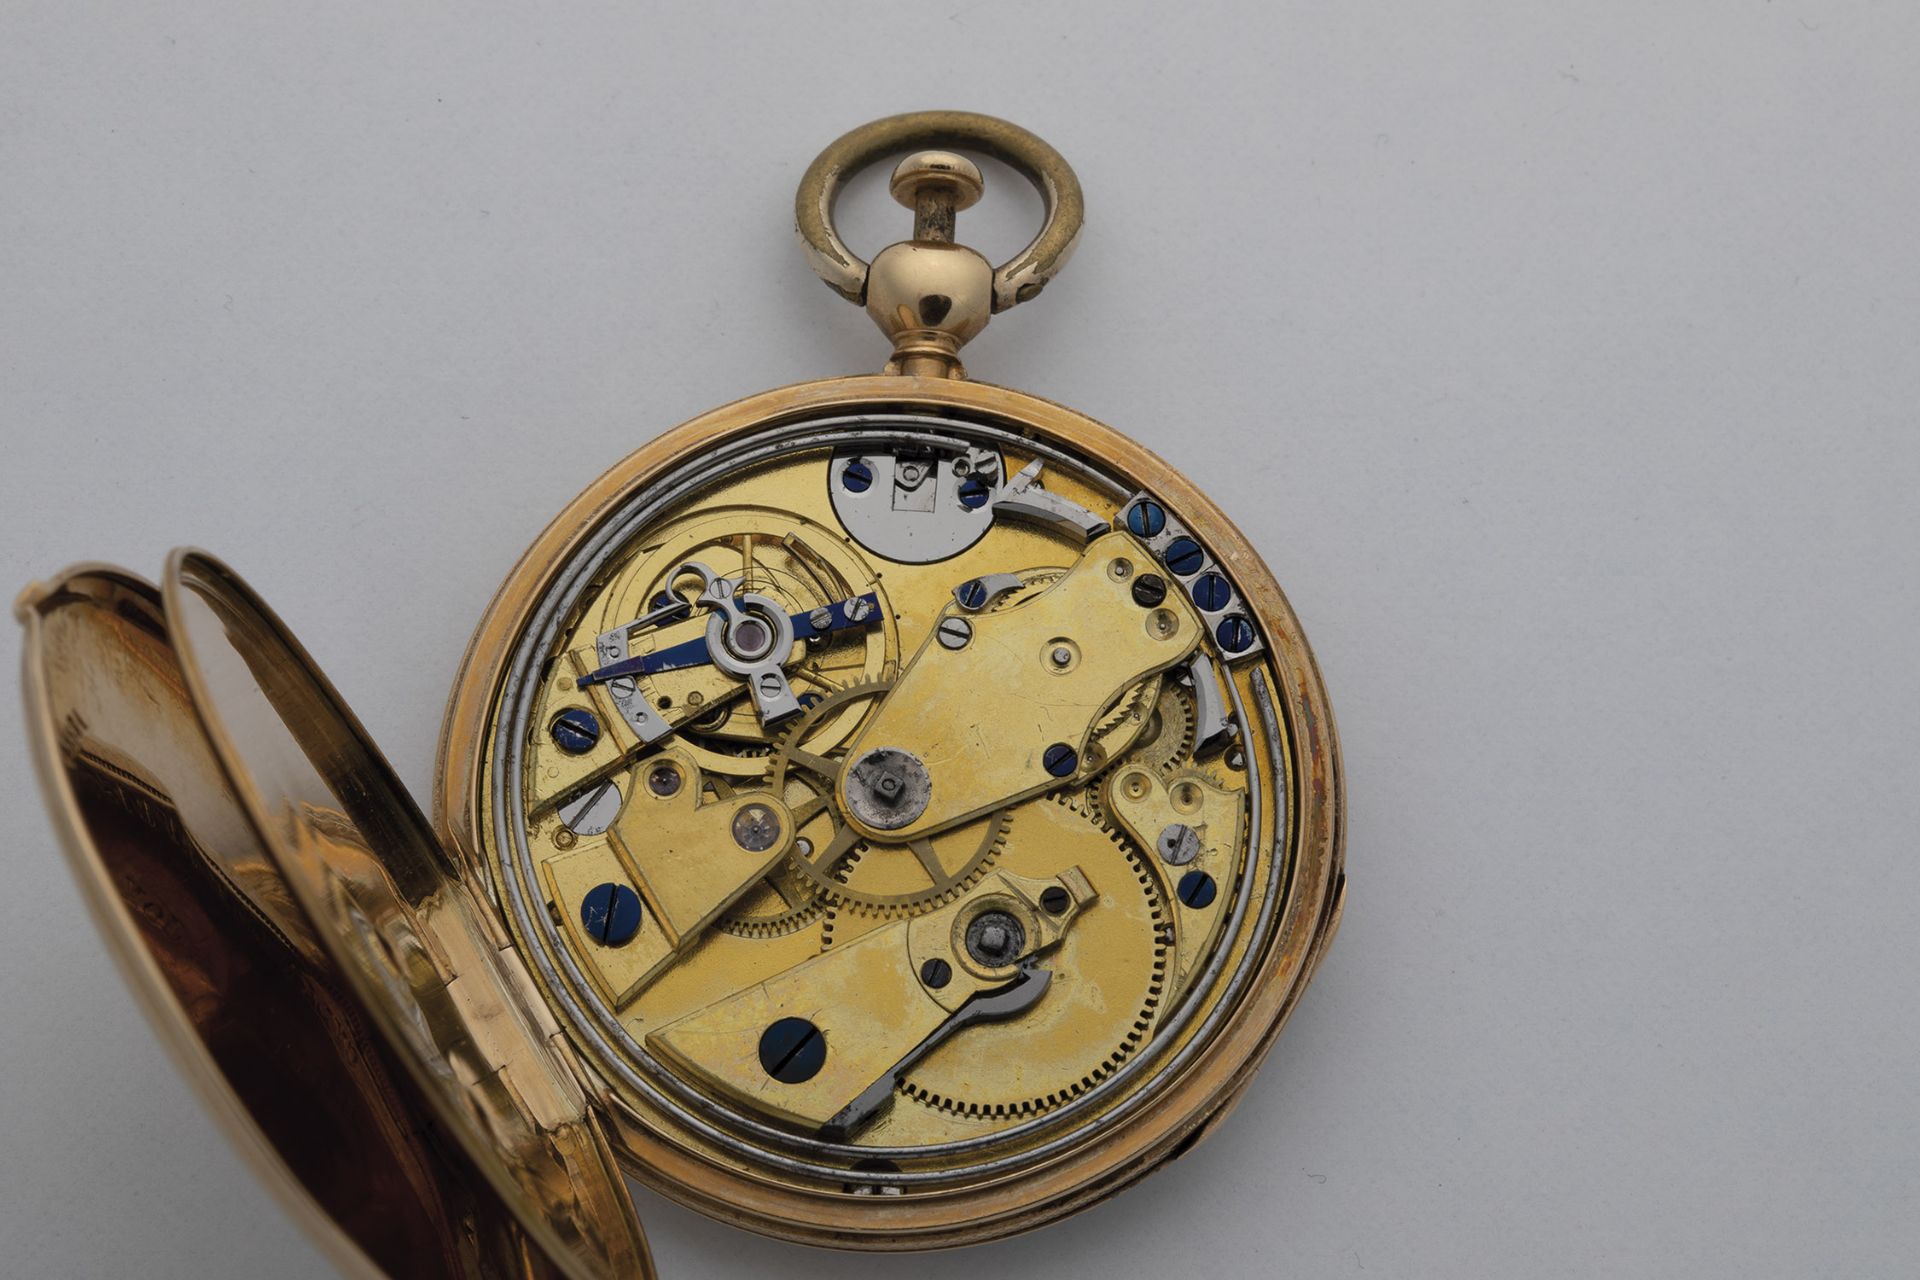 Pocket watch with 1/4 hour repeater - Image 3 of 3